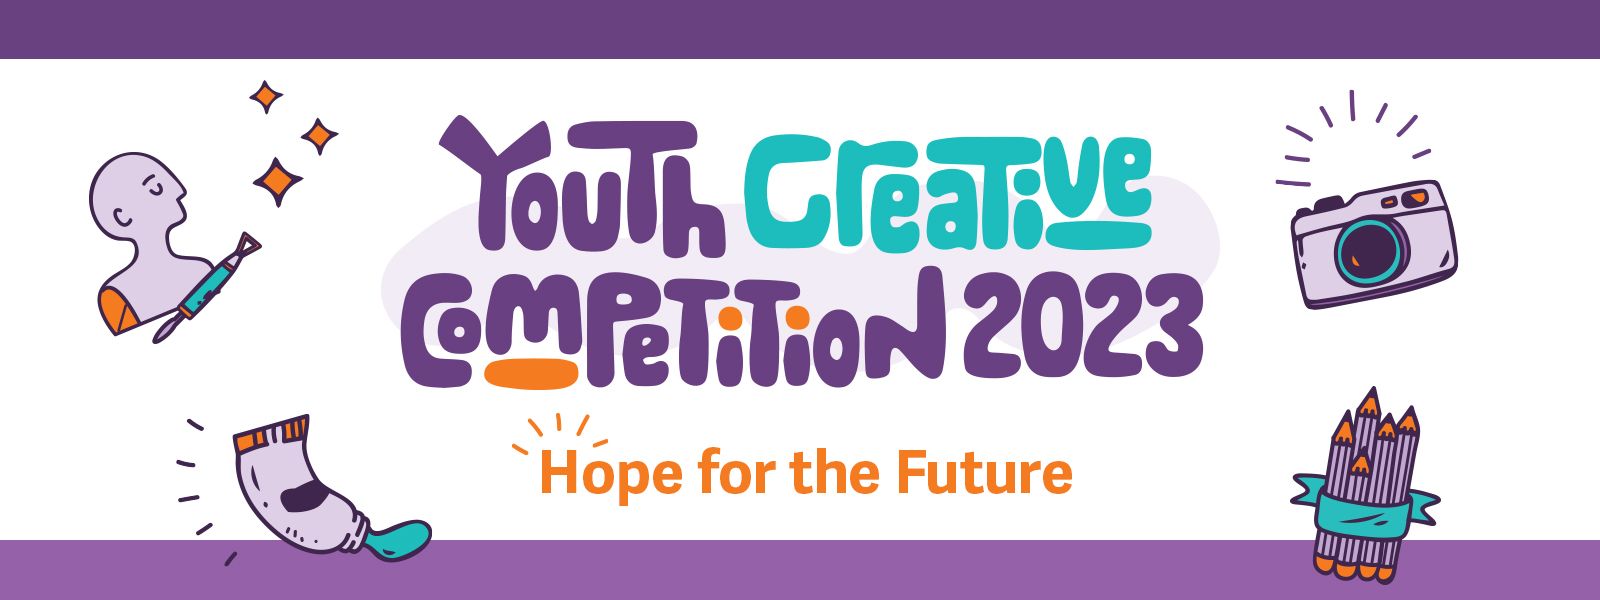 Youth Creative Competition_banner.jpg